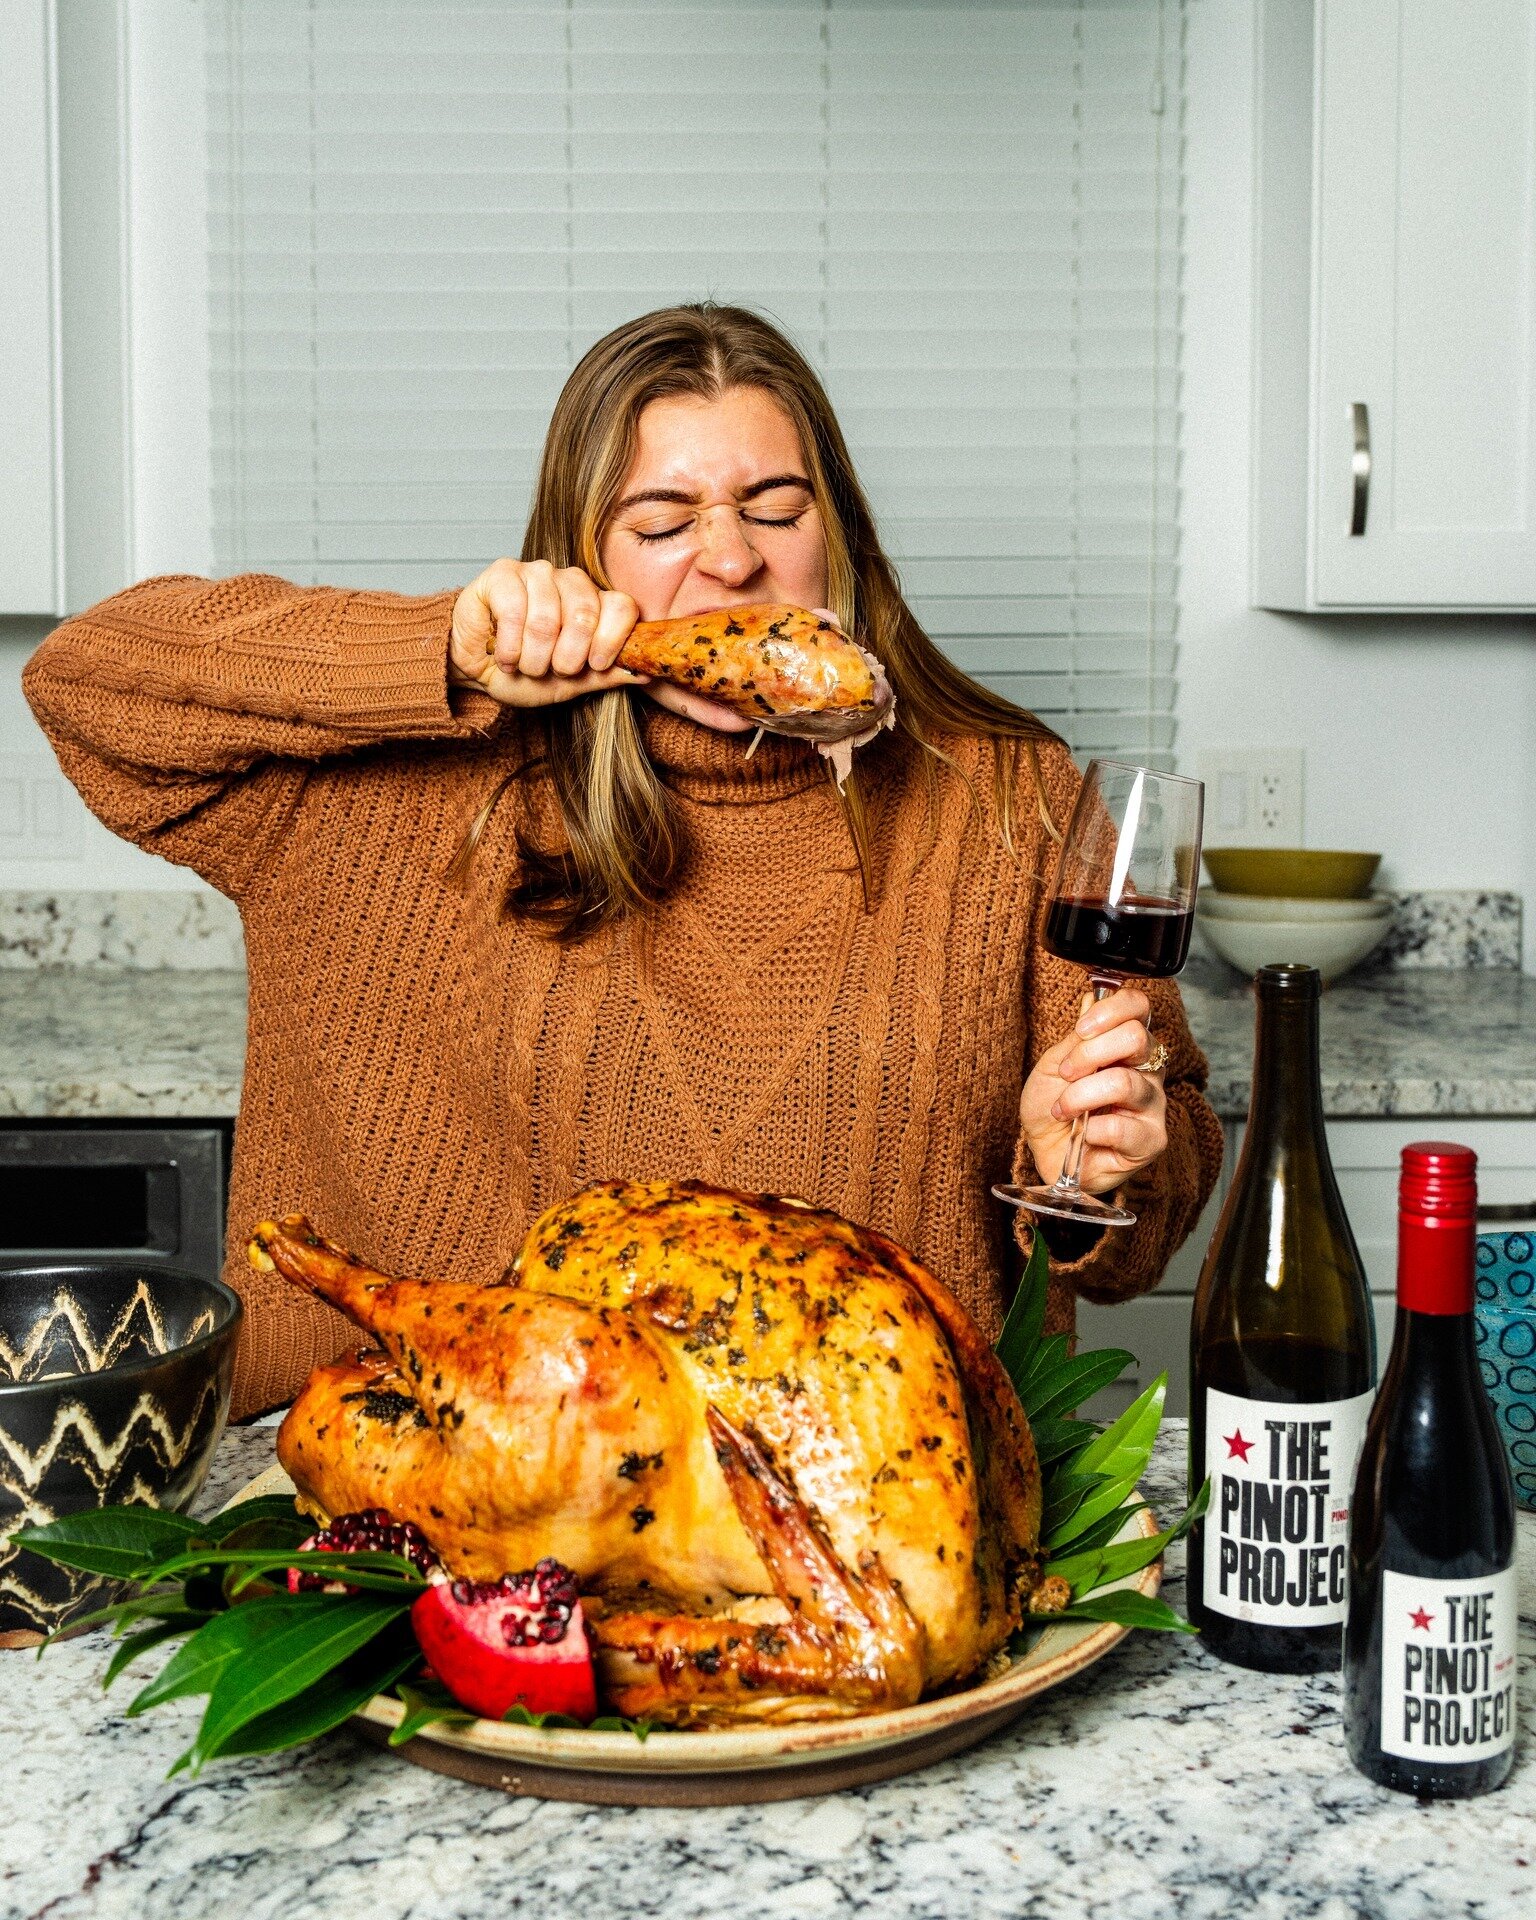 Gobble Gobble! Happy Thanksgiving to you and your loved ones 🦃🍷